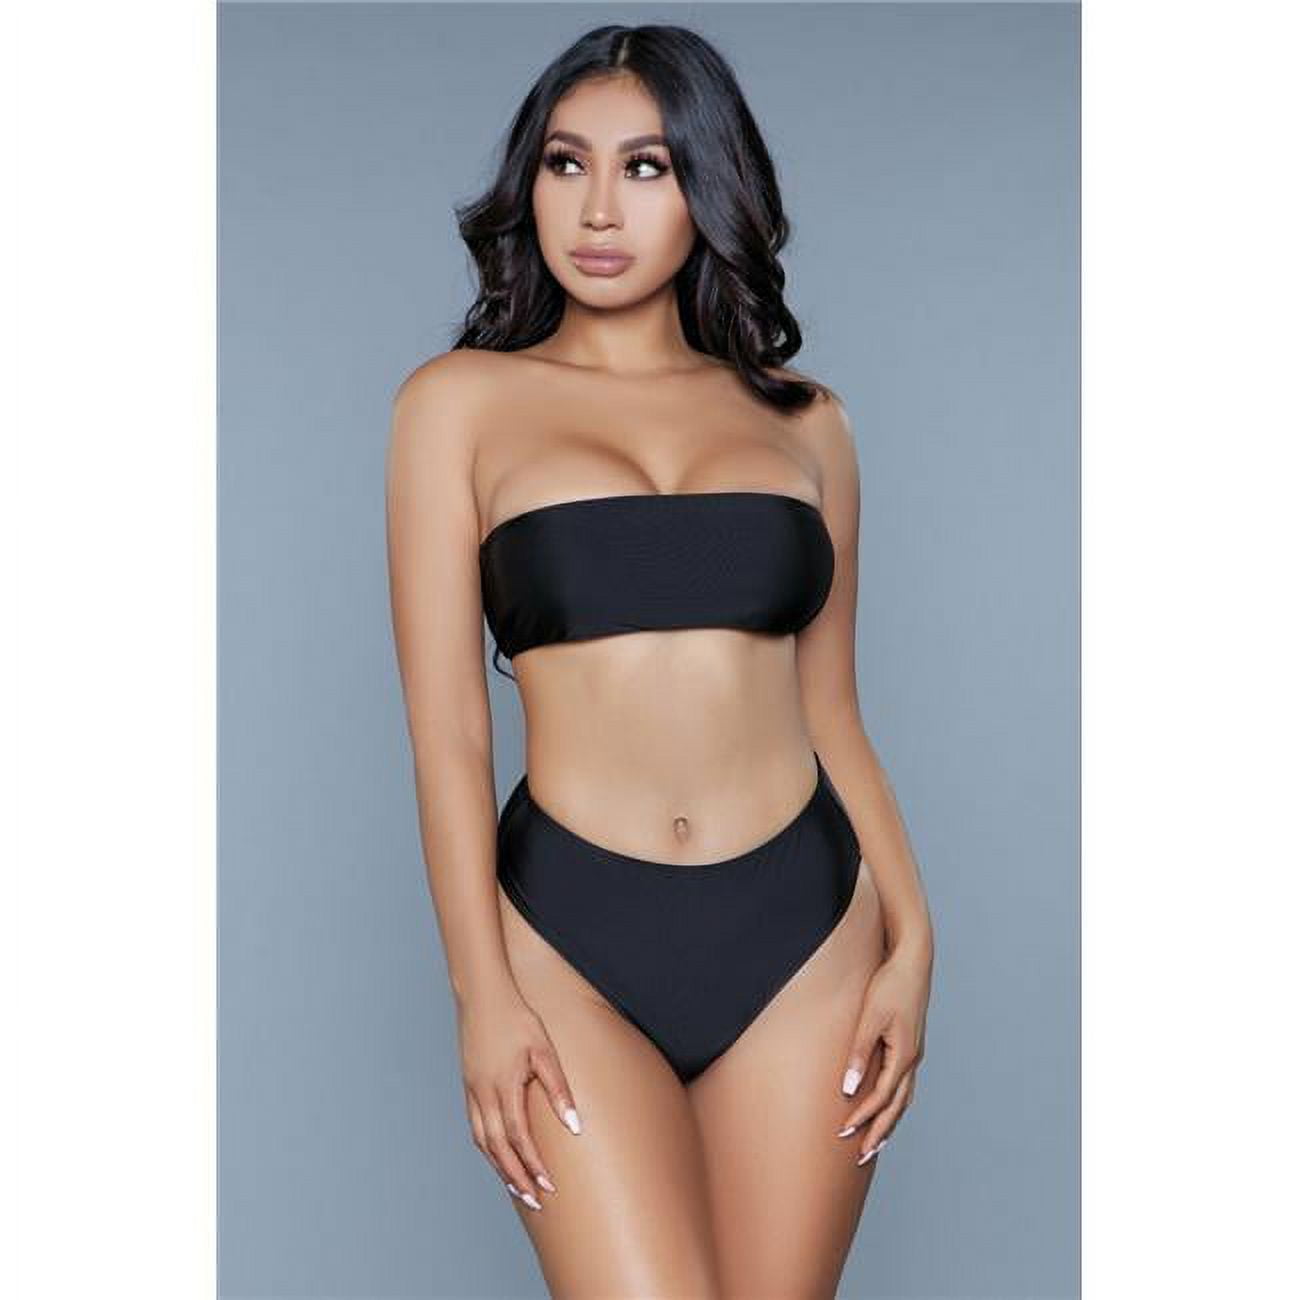 Picture of BeWicked 1974-XL-BLACK Women Serenity Swimsuit, Black - Extra Large - 2 Piece